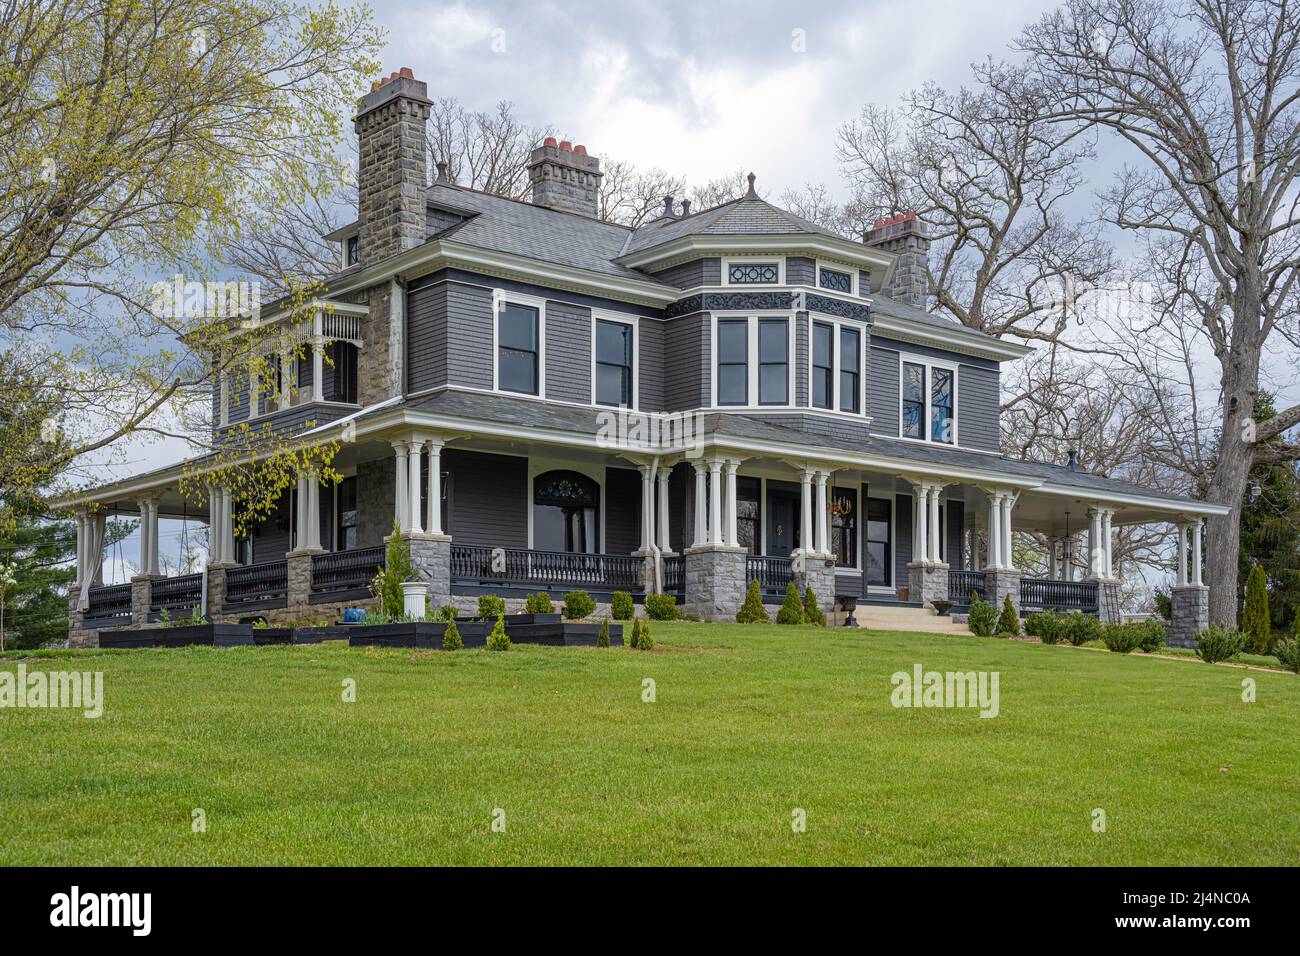 The Rumbough House, built in 1895, is a turn-of-the-20th Century Queen Anne style residence in the Montford Historic District of Asheville, NC. (USA) Stock Photo